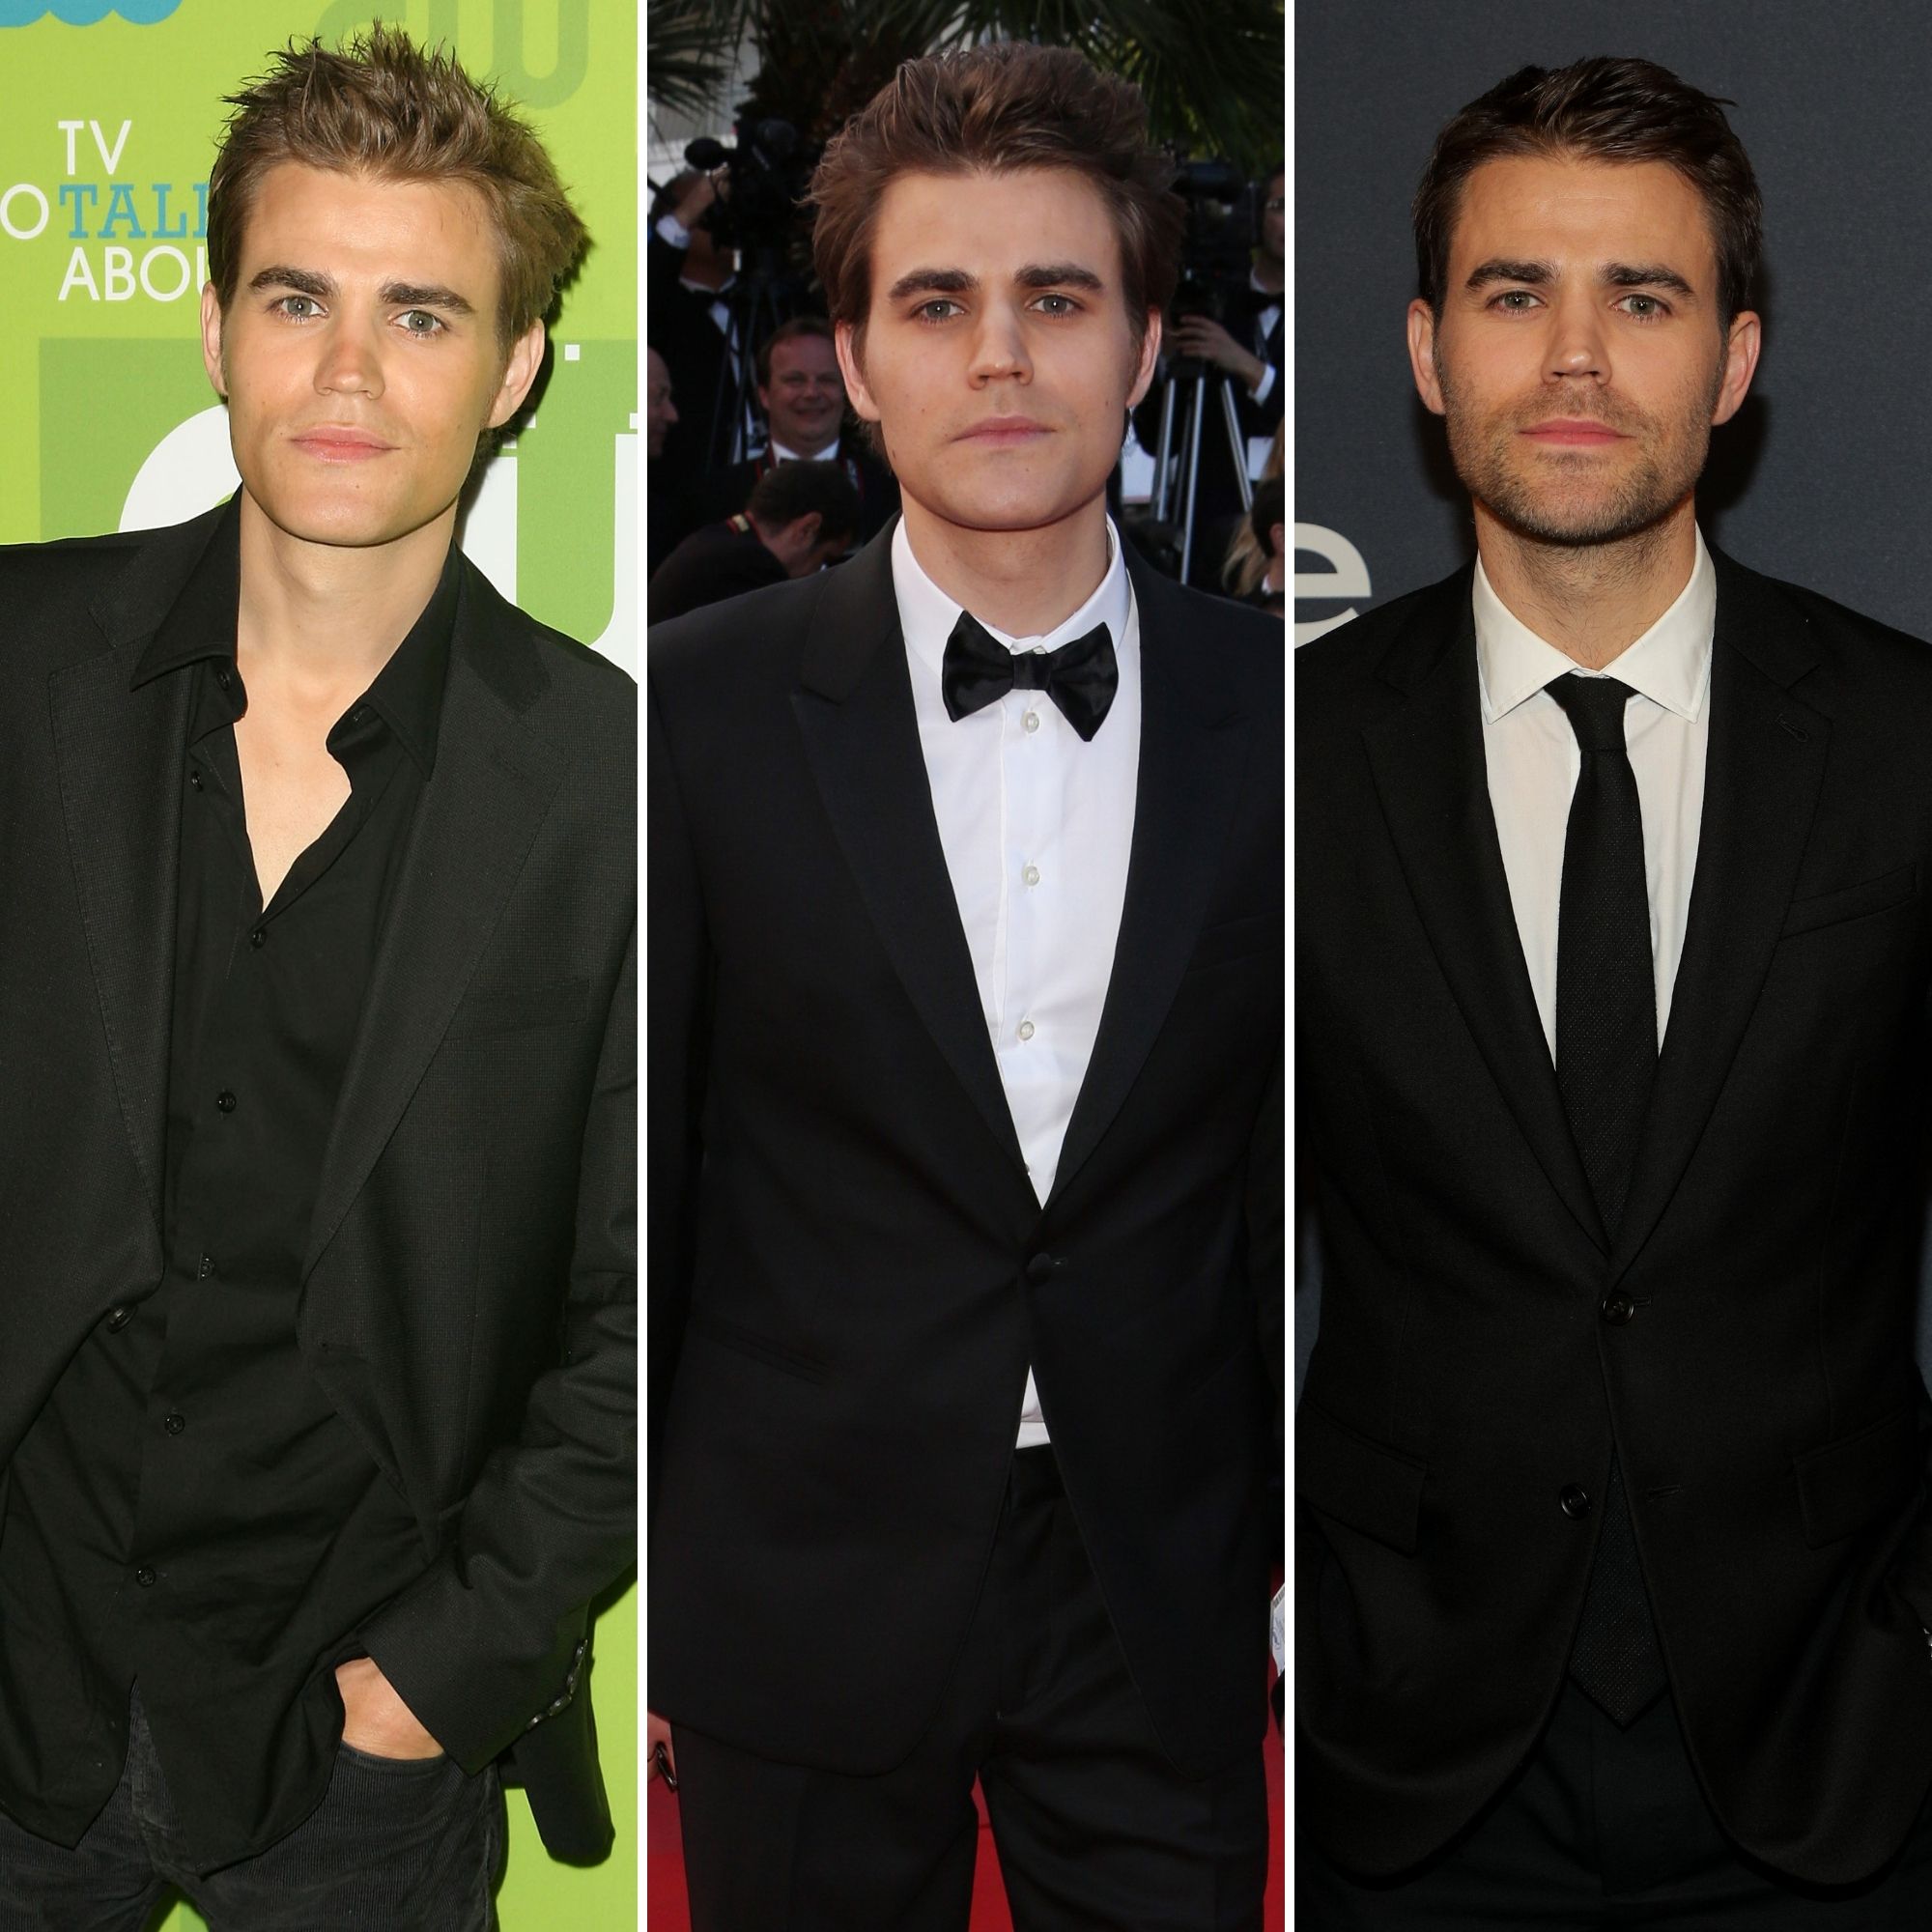 Paul Wesley S Transformation From Vampire Diaries To Now Photos